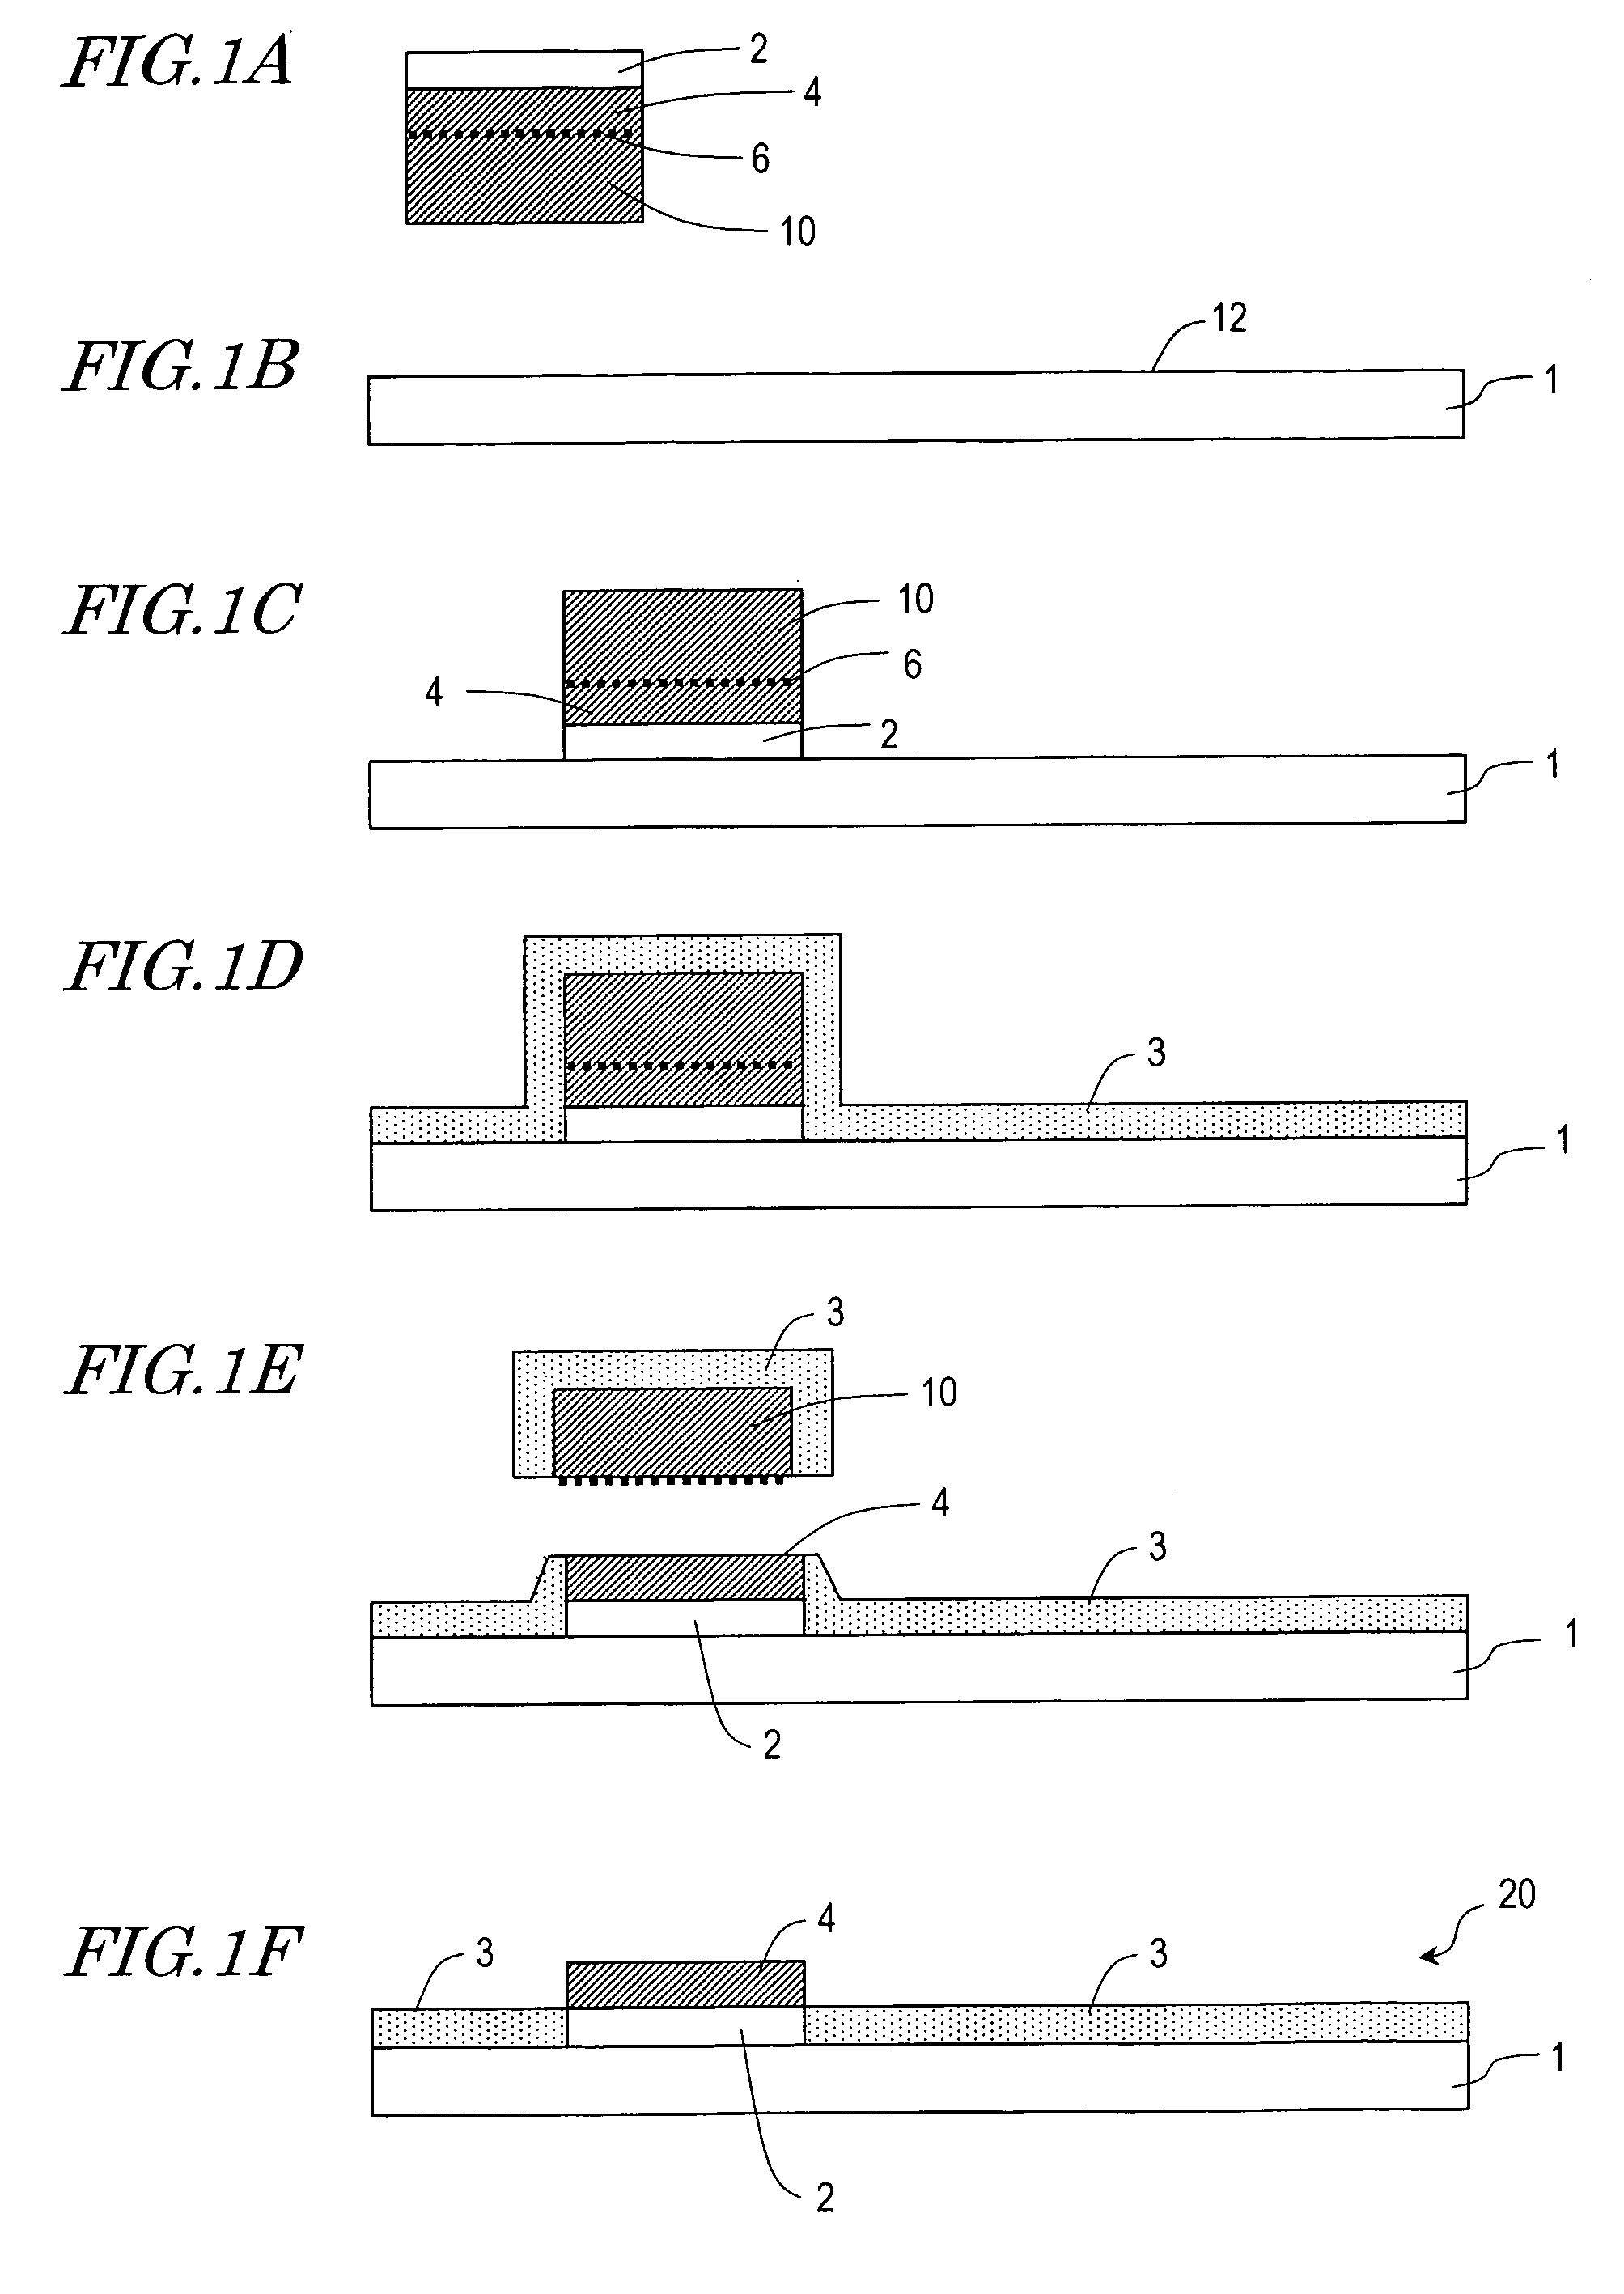 Semiconductor device with single crystal semiconductor layer(s) bonded to insulating surface of substrate